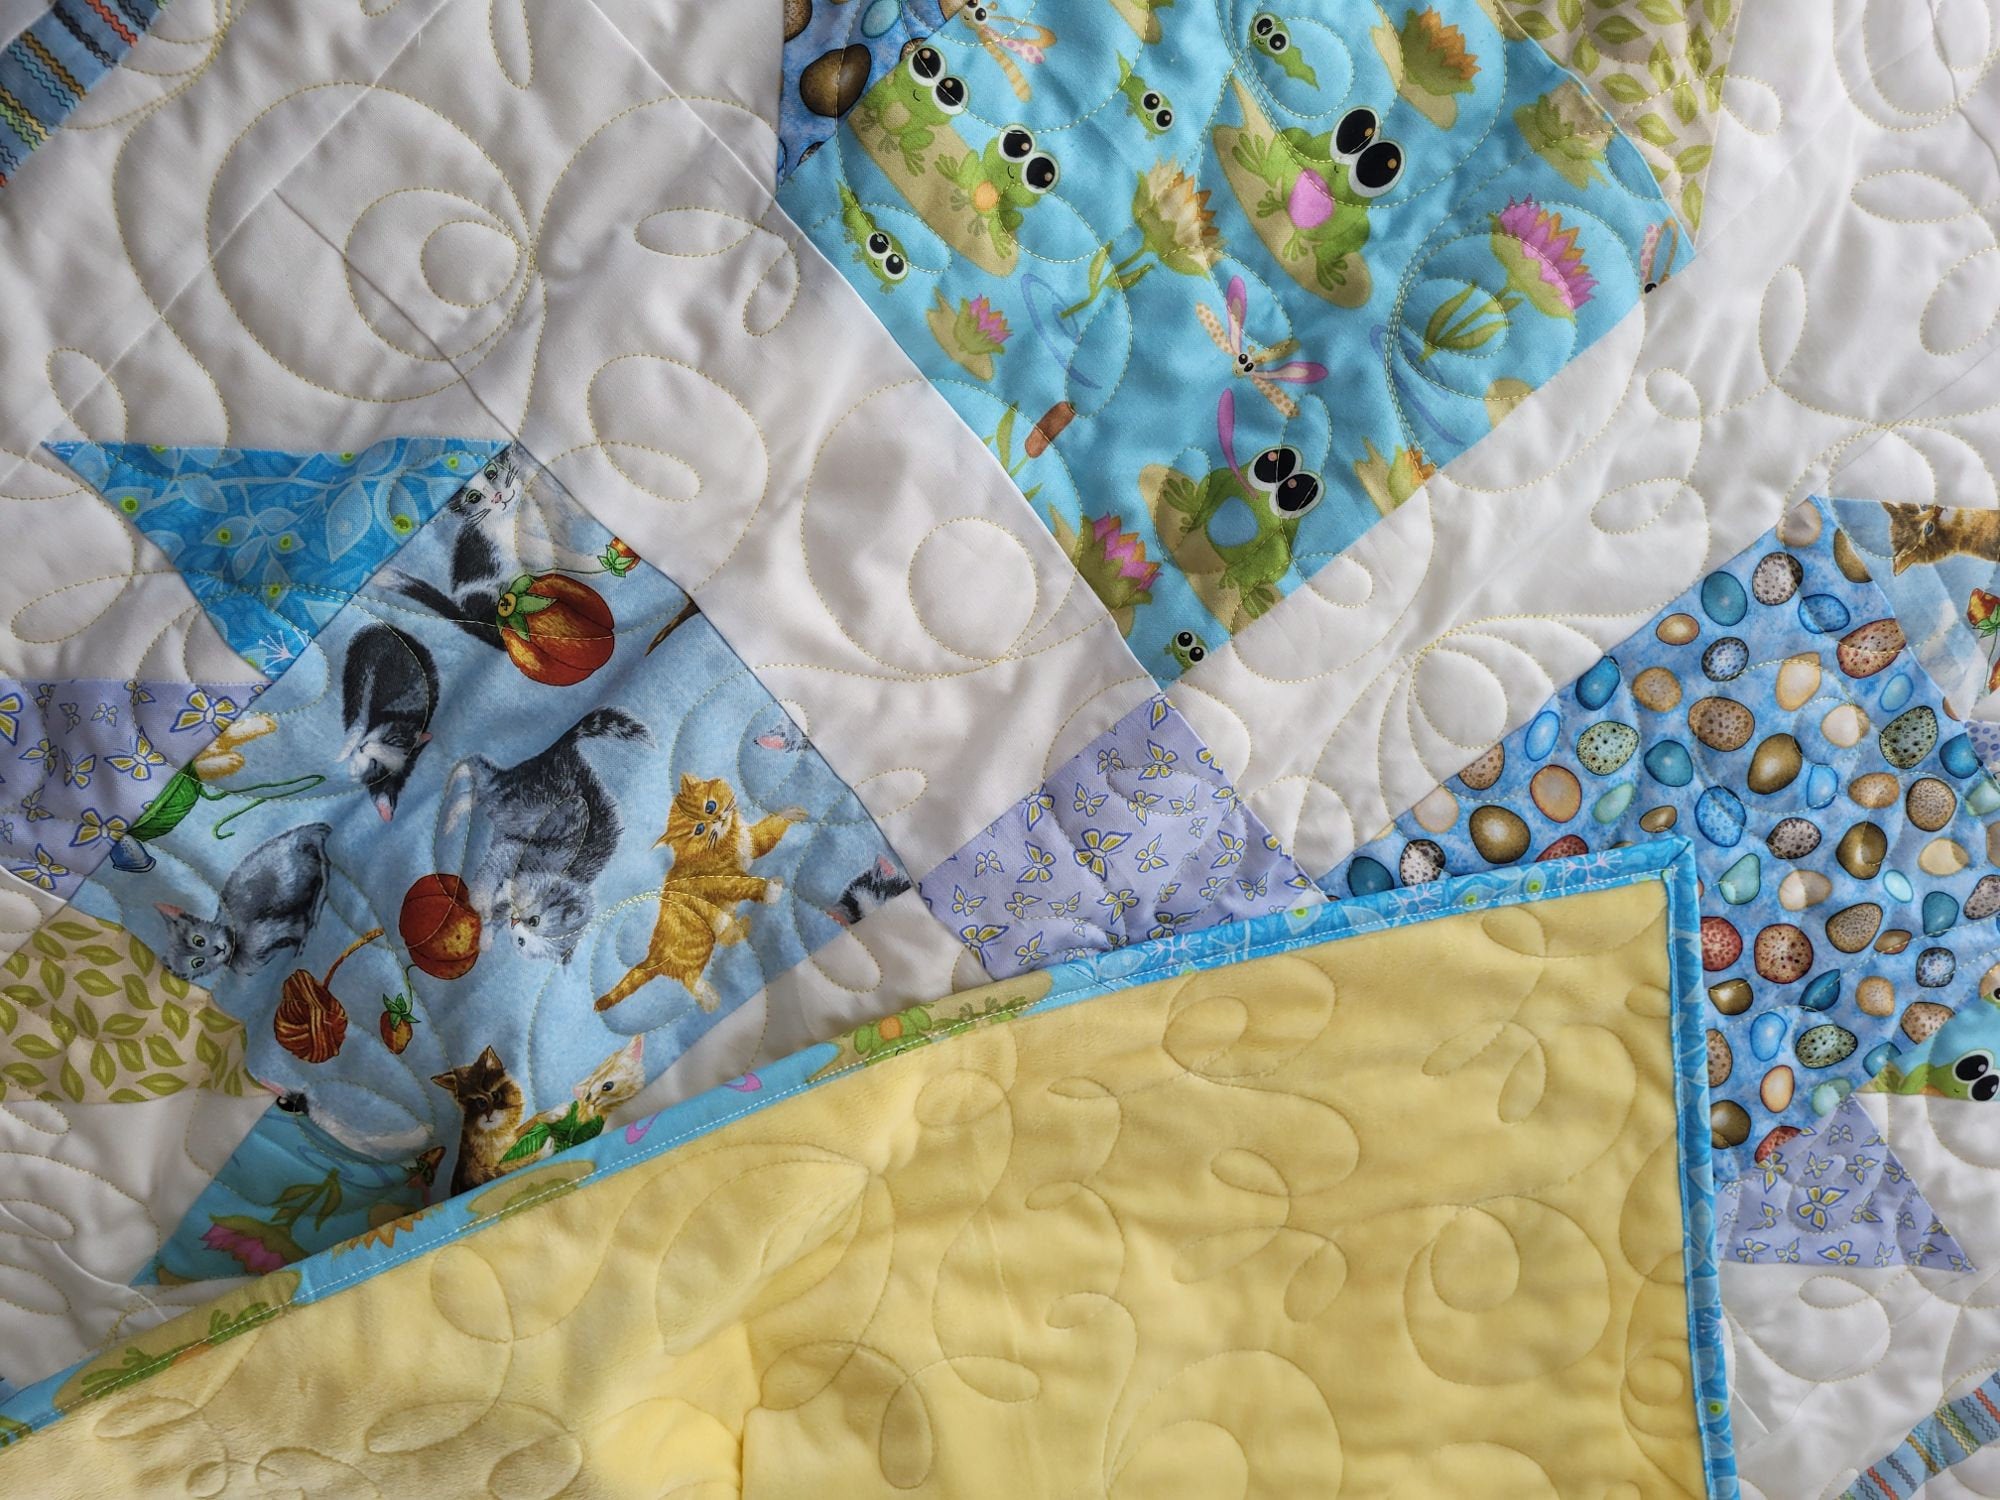 animal theme baby quilt with soft yellow minky backing